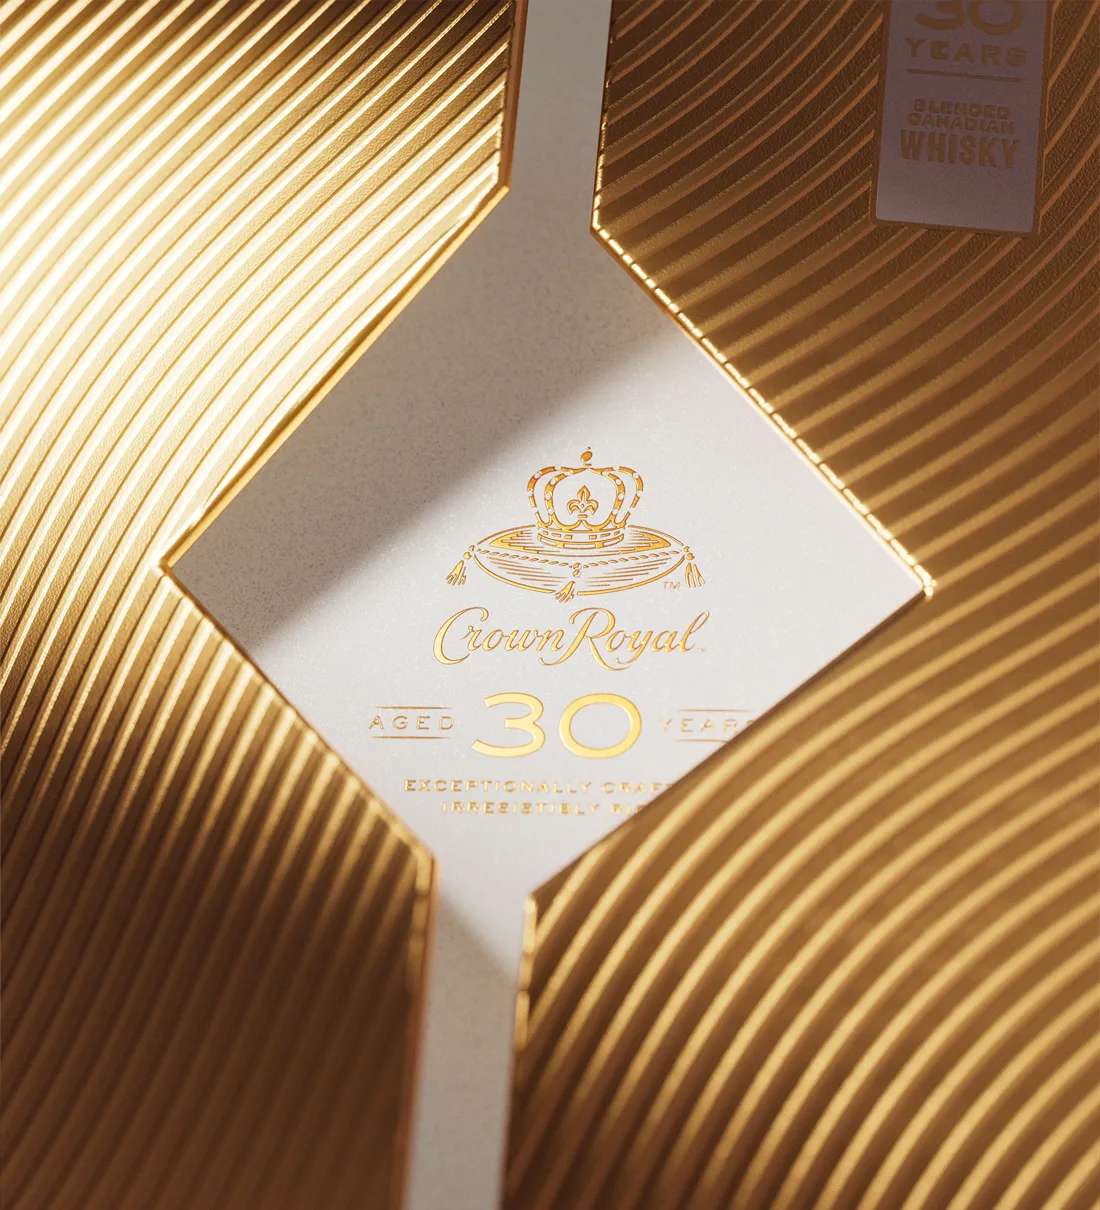 Special box for Crown Royal aged 30 years